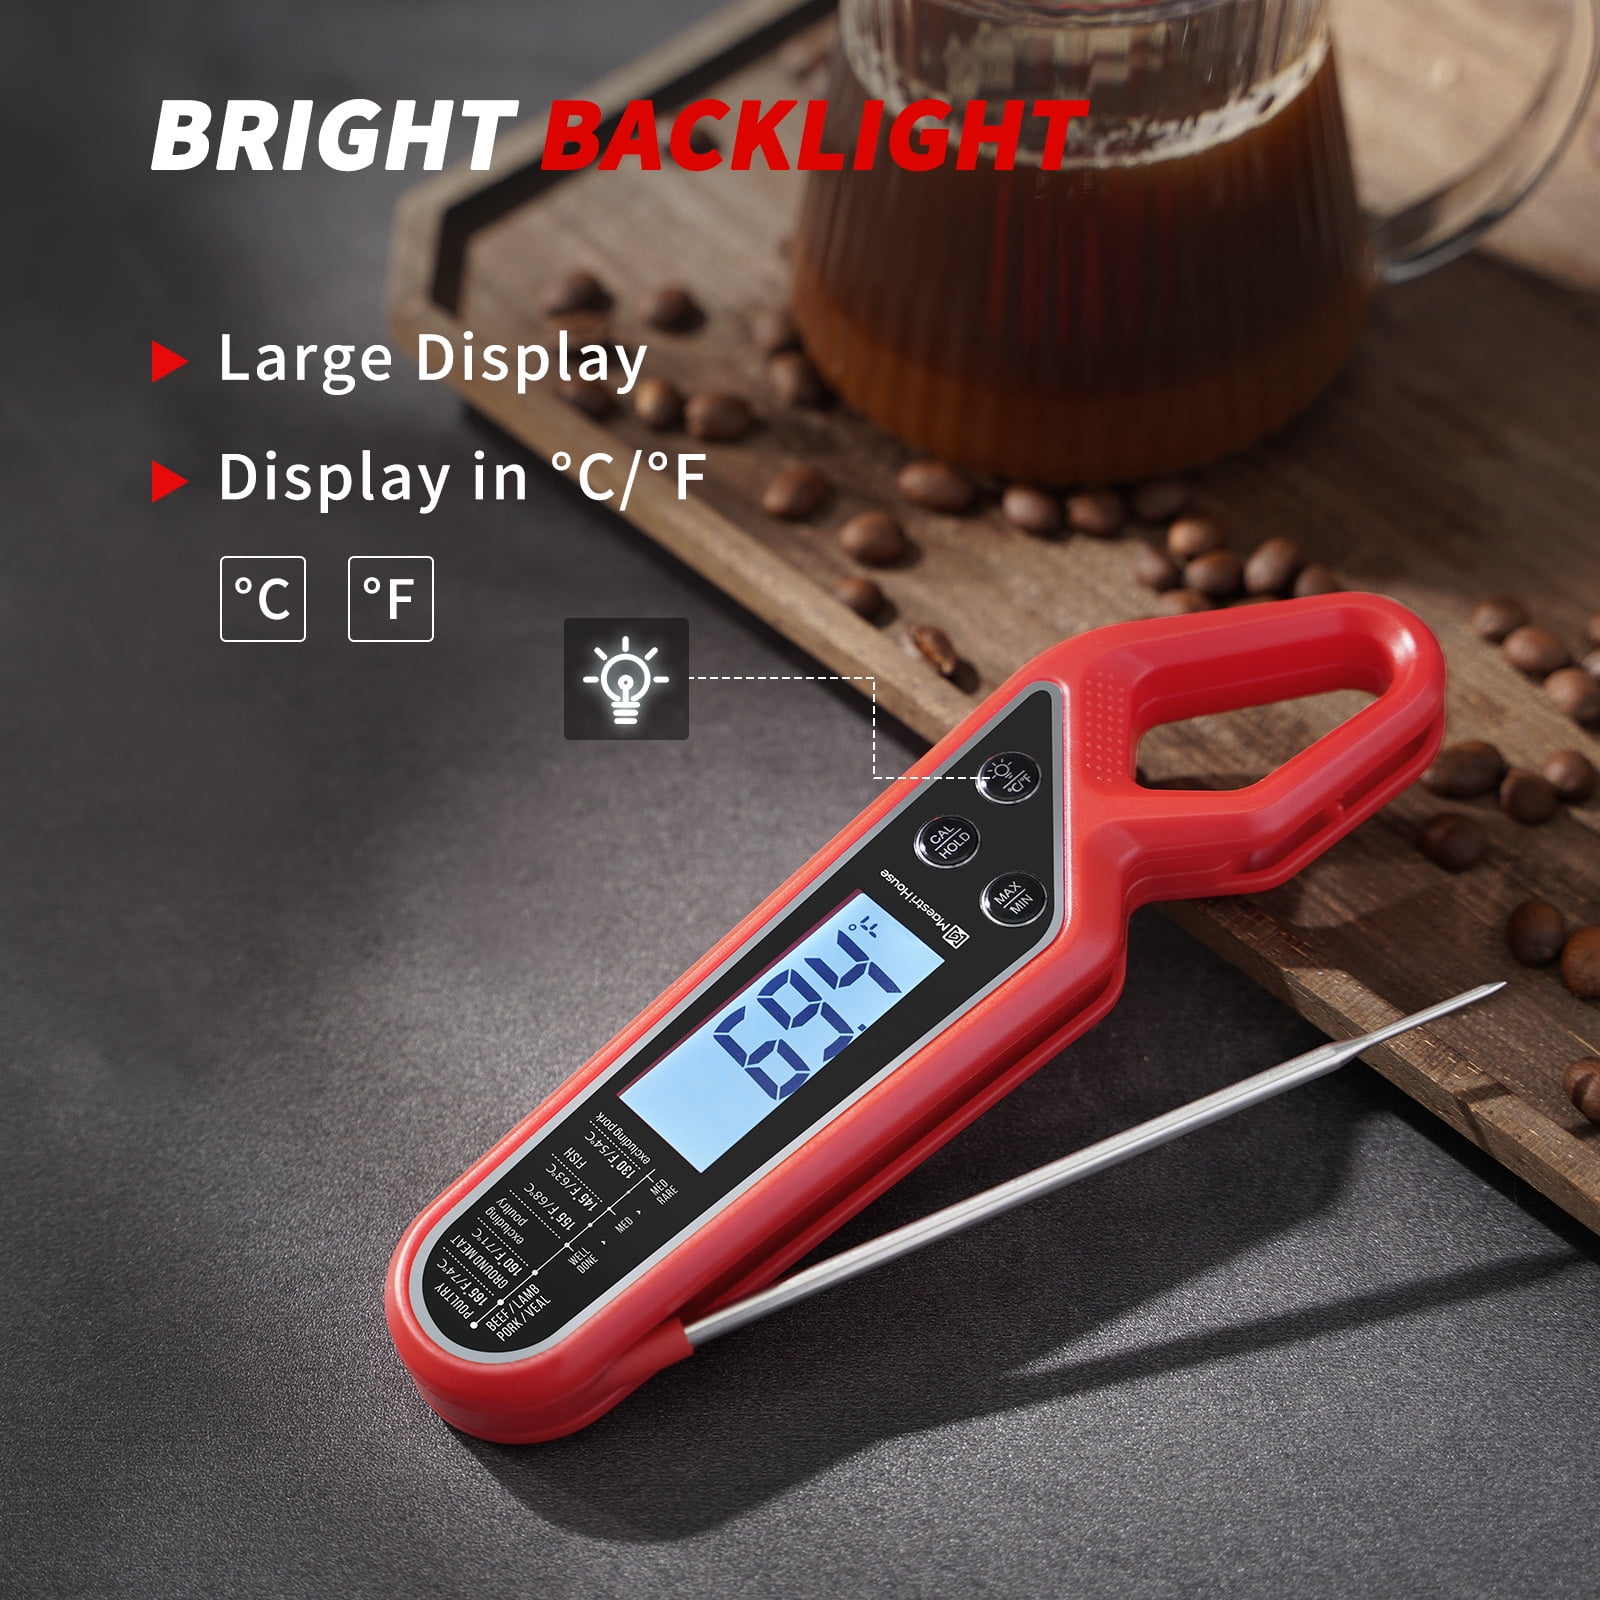 NIXIUKOL Digital Meat Thermometer 2-in-1 Grillthermometer Instant Read with Temperature Alarm, Large LCD Screen, Magnet, Food Thermometer Best for BBQ